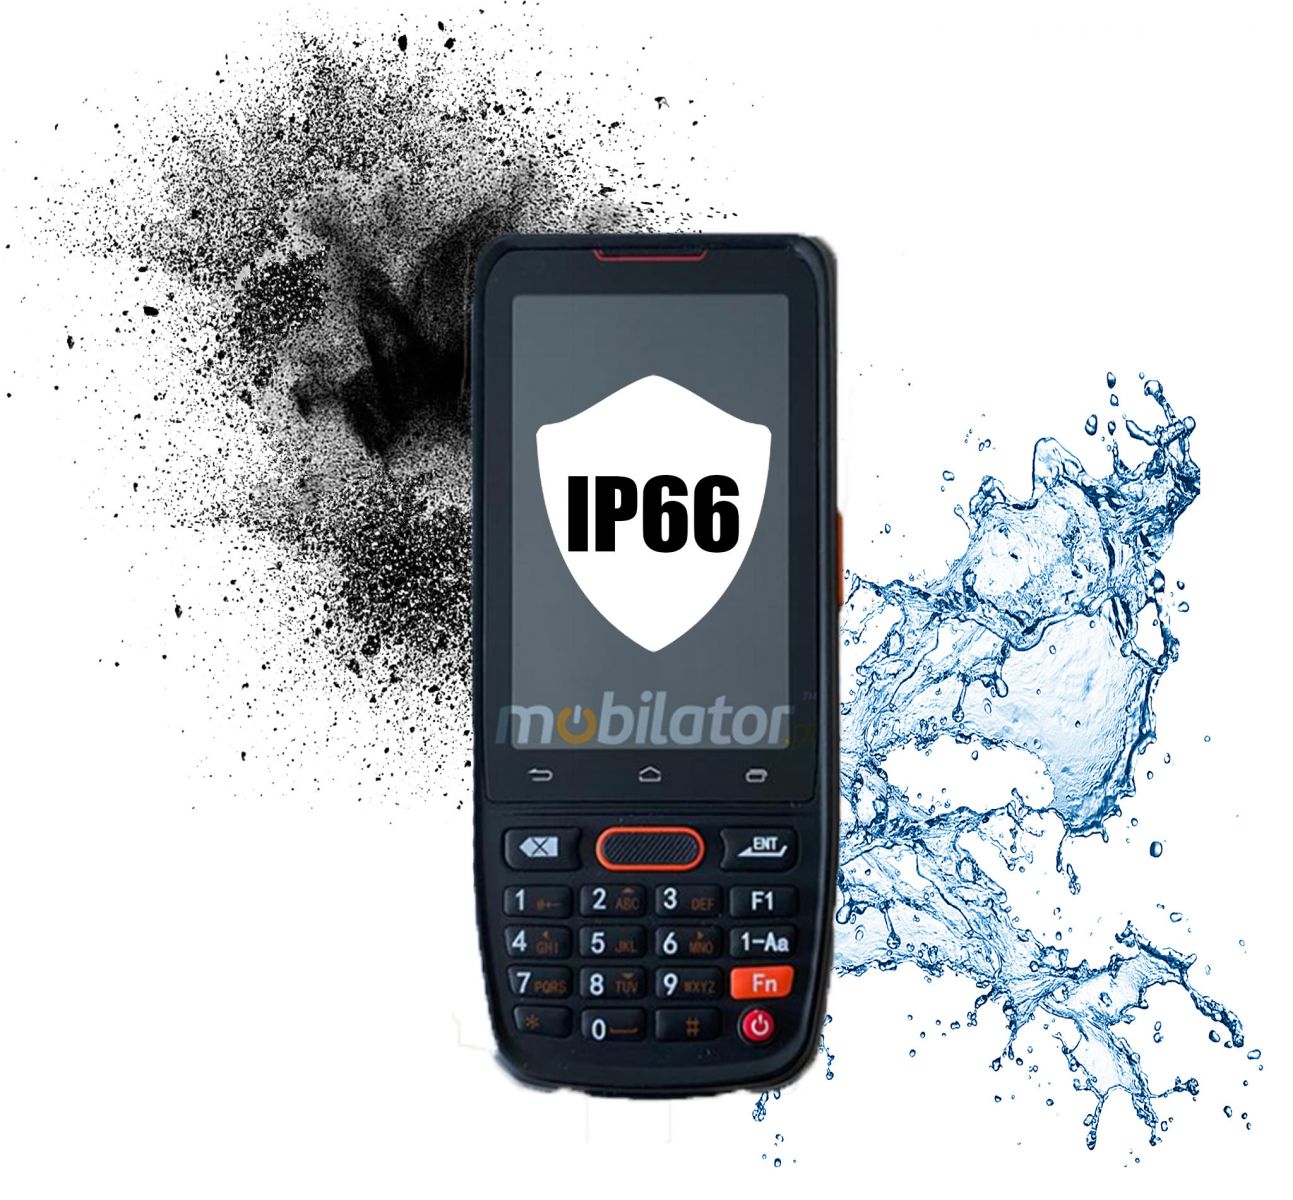 IP66 protection standard protects Senter ST917M against water and dust